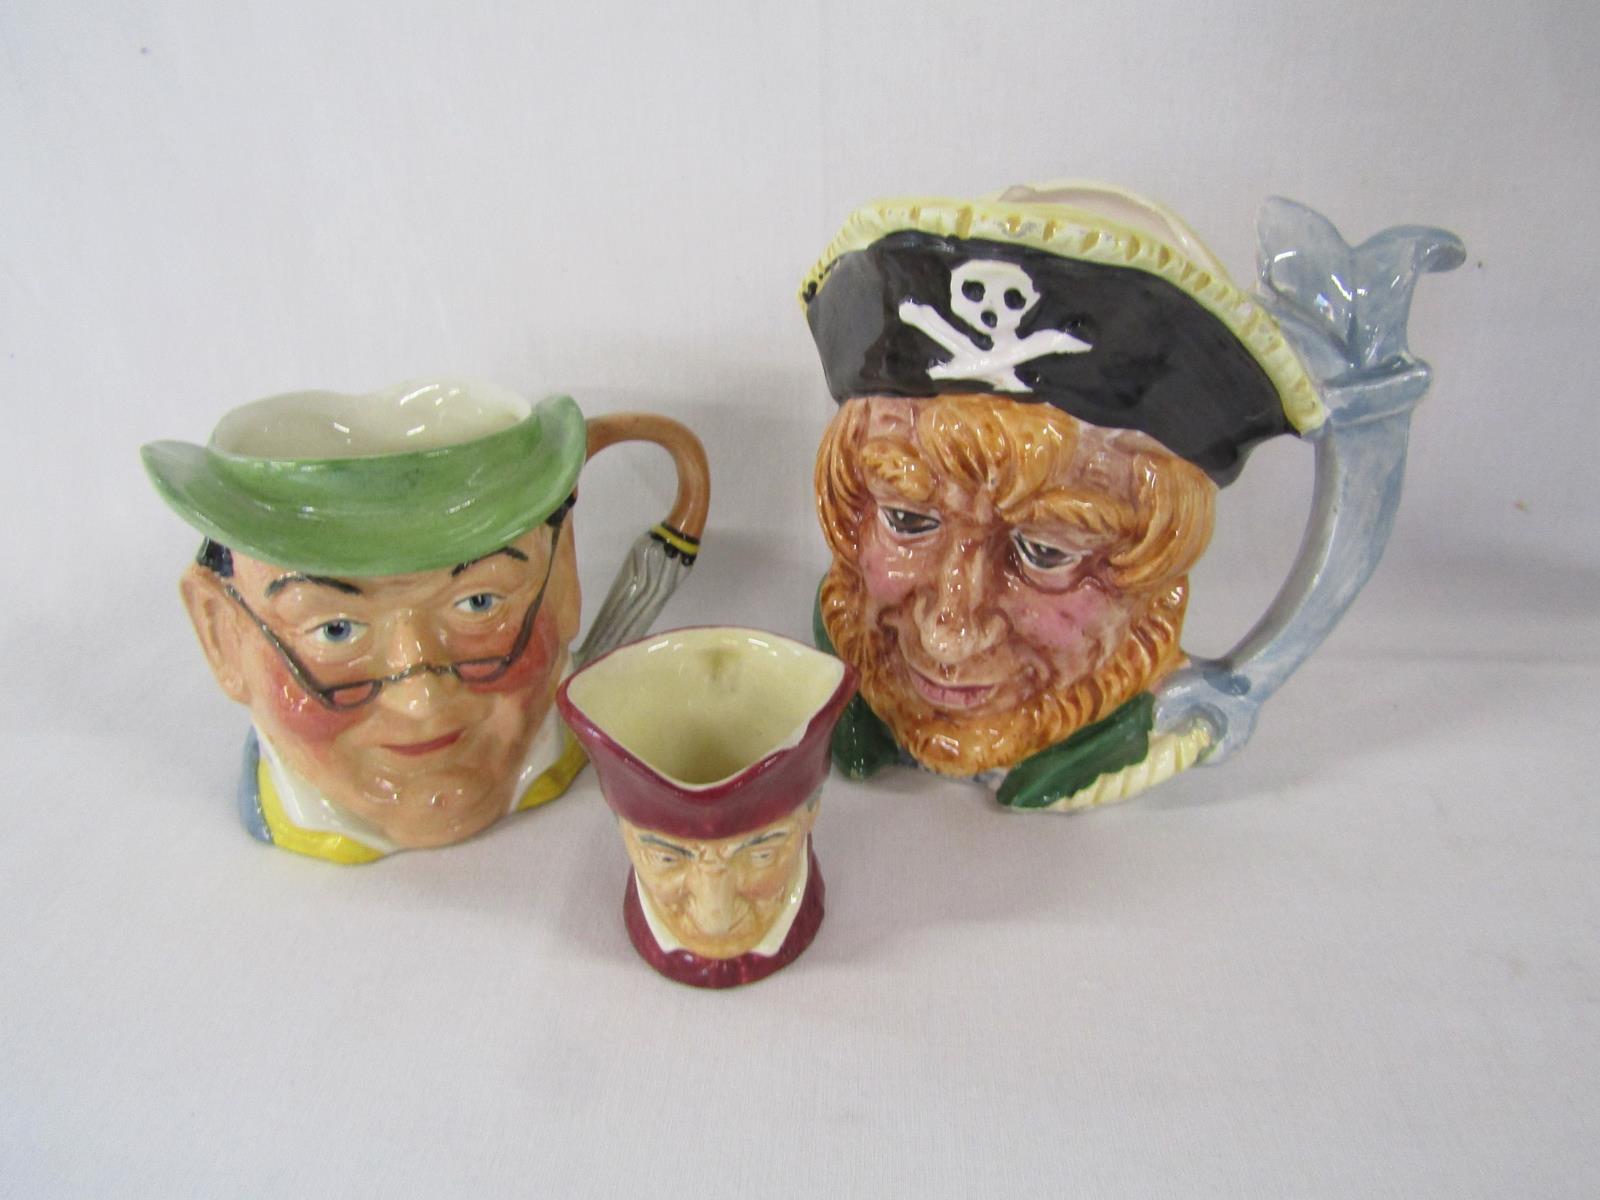 14 character & toby jugs includes town crier, Kelsbro Ware 'Mr Pickwick', Royal Doulton miniature, - Image 5 of 6